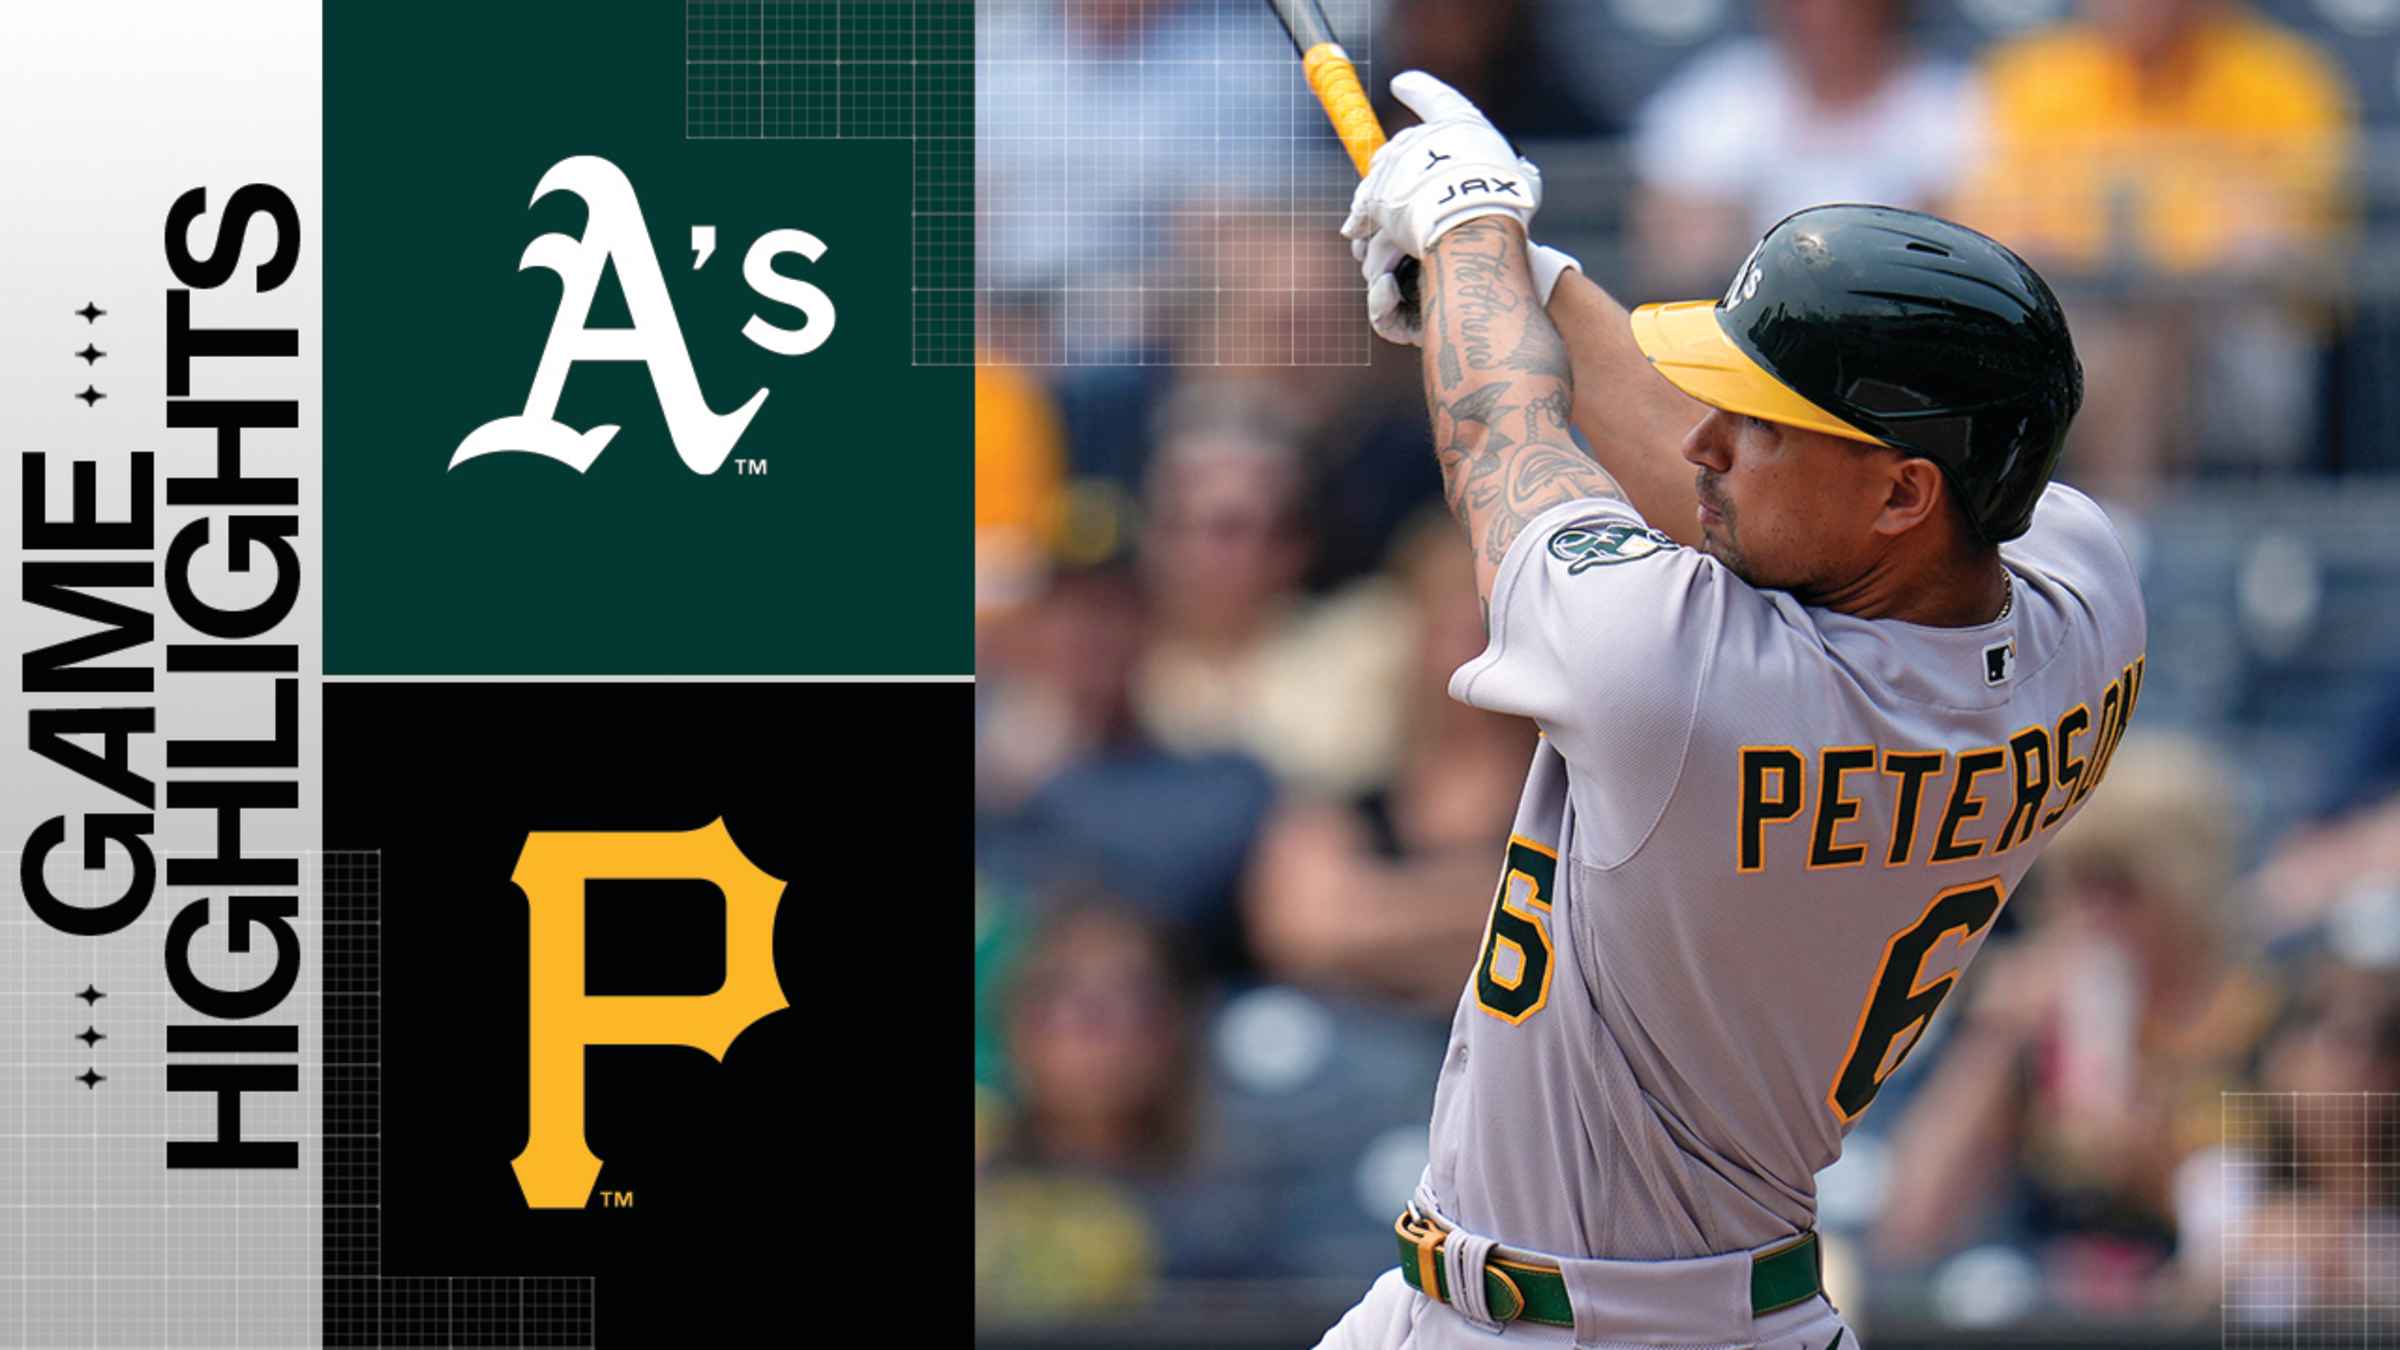 A's Win Consecutive Games, Noda Homers, Harris Gets 1st Win, 9-5